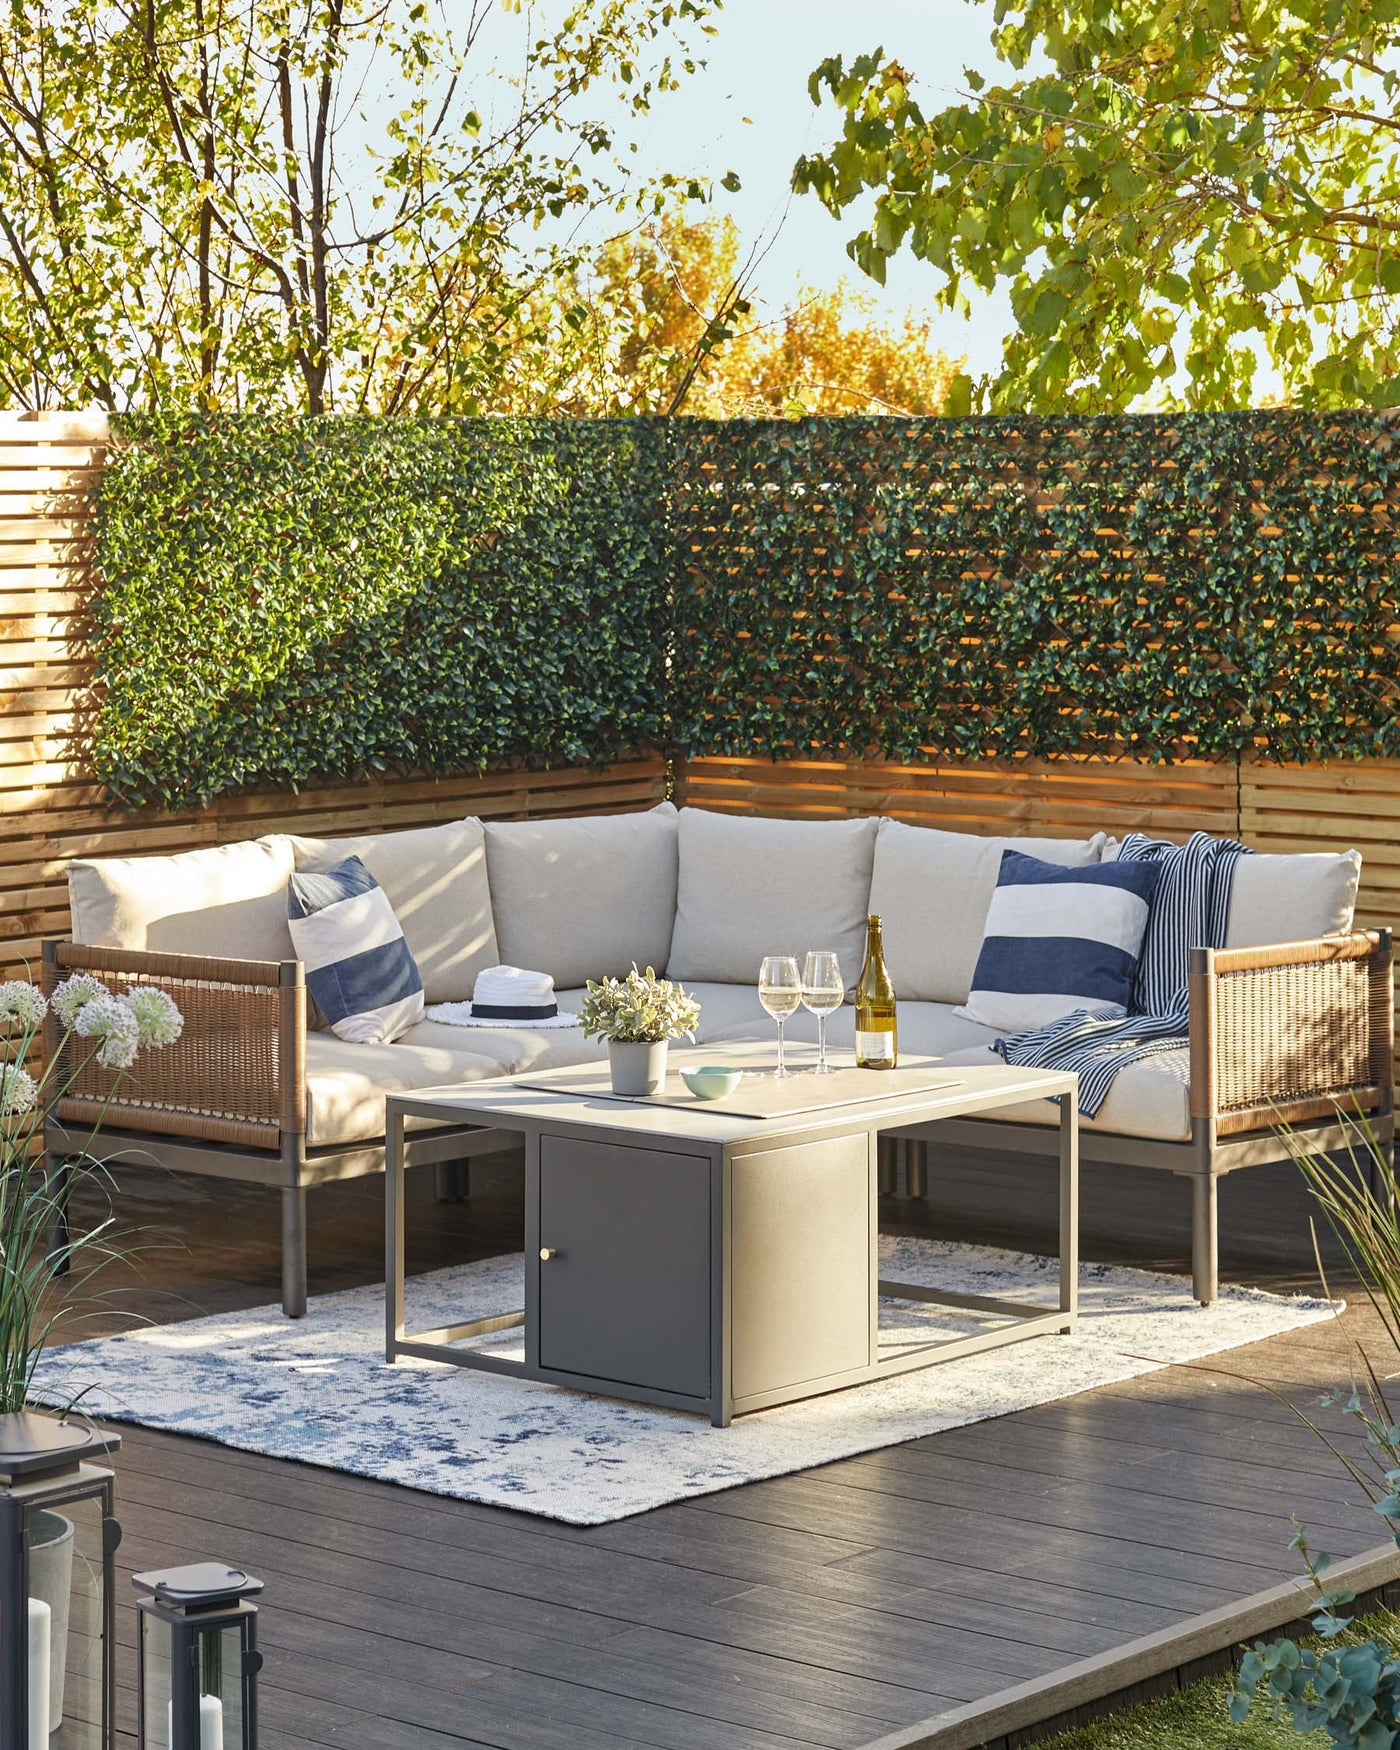 Outdoor furniture set on a wooden deck, featuring a modular corner sofa with light beige cushions, and a modern, rectangular coffee table with a grey finish and storage compartment. Accessorized with striped and solid throw pillows, white flowers, and glassware.